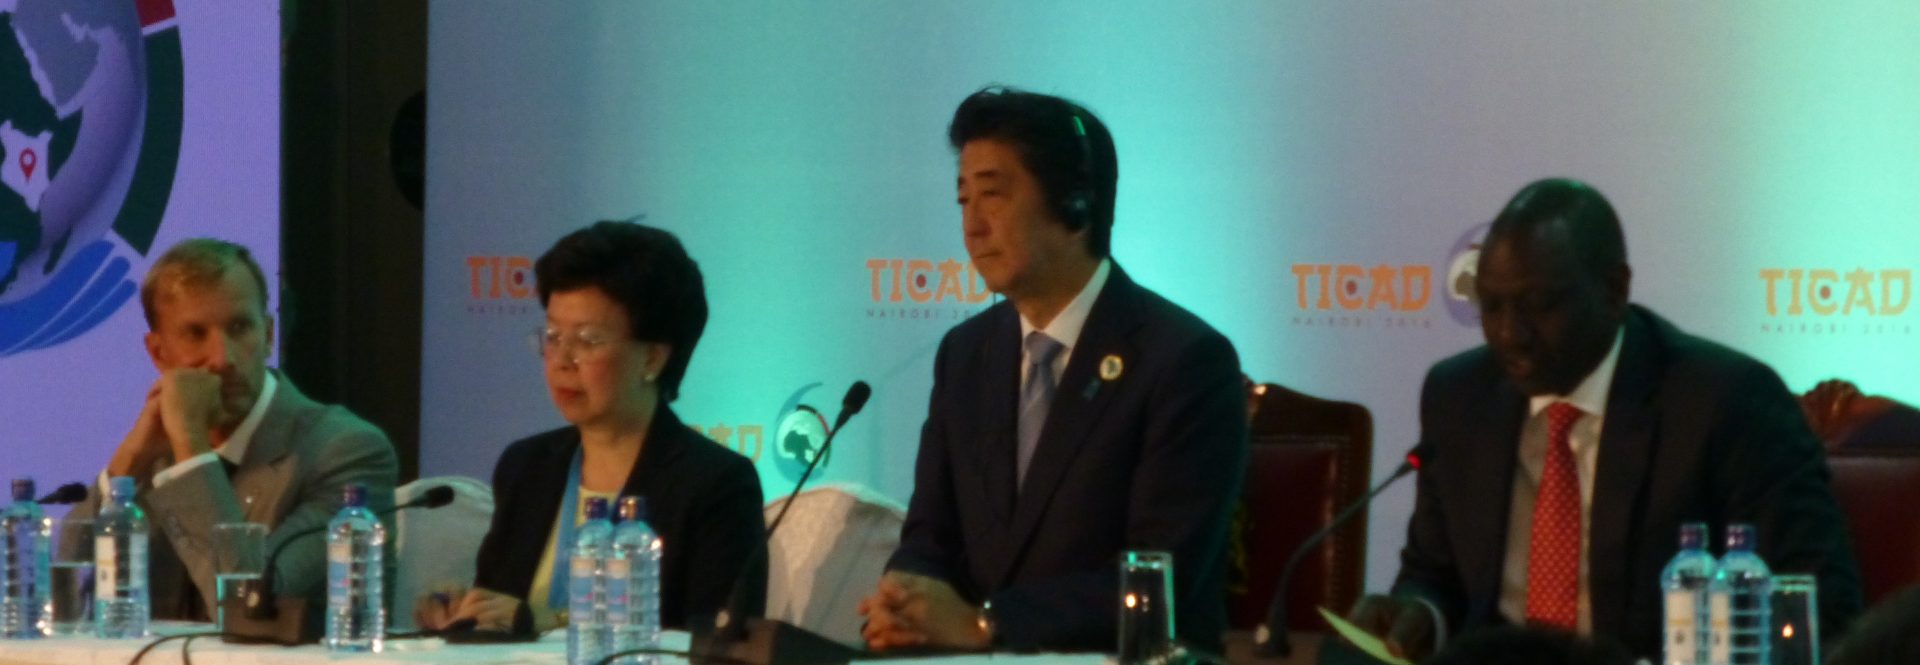 201608- TICAD side event3